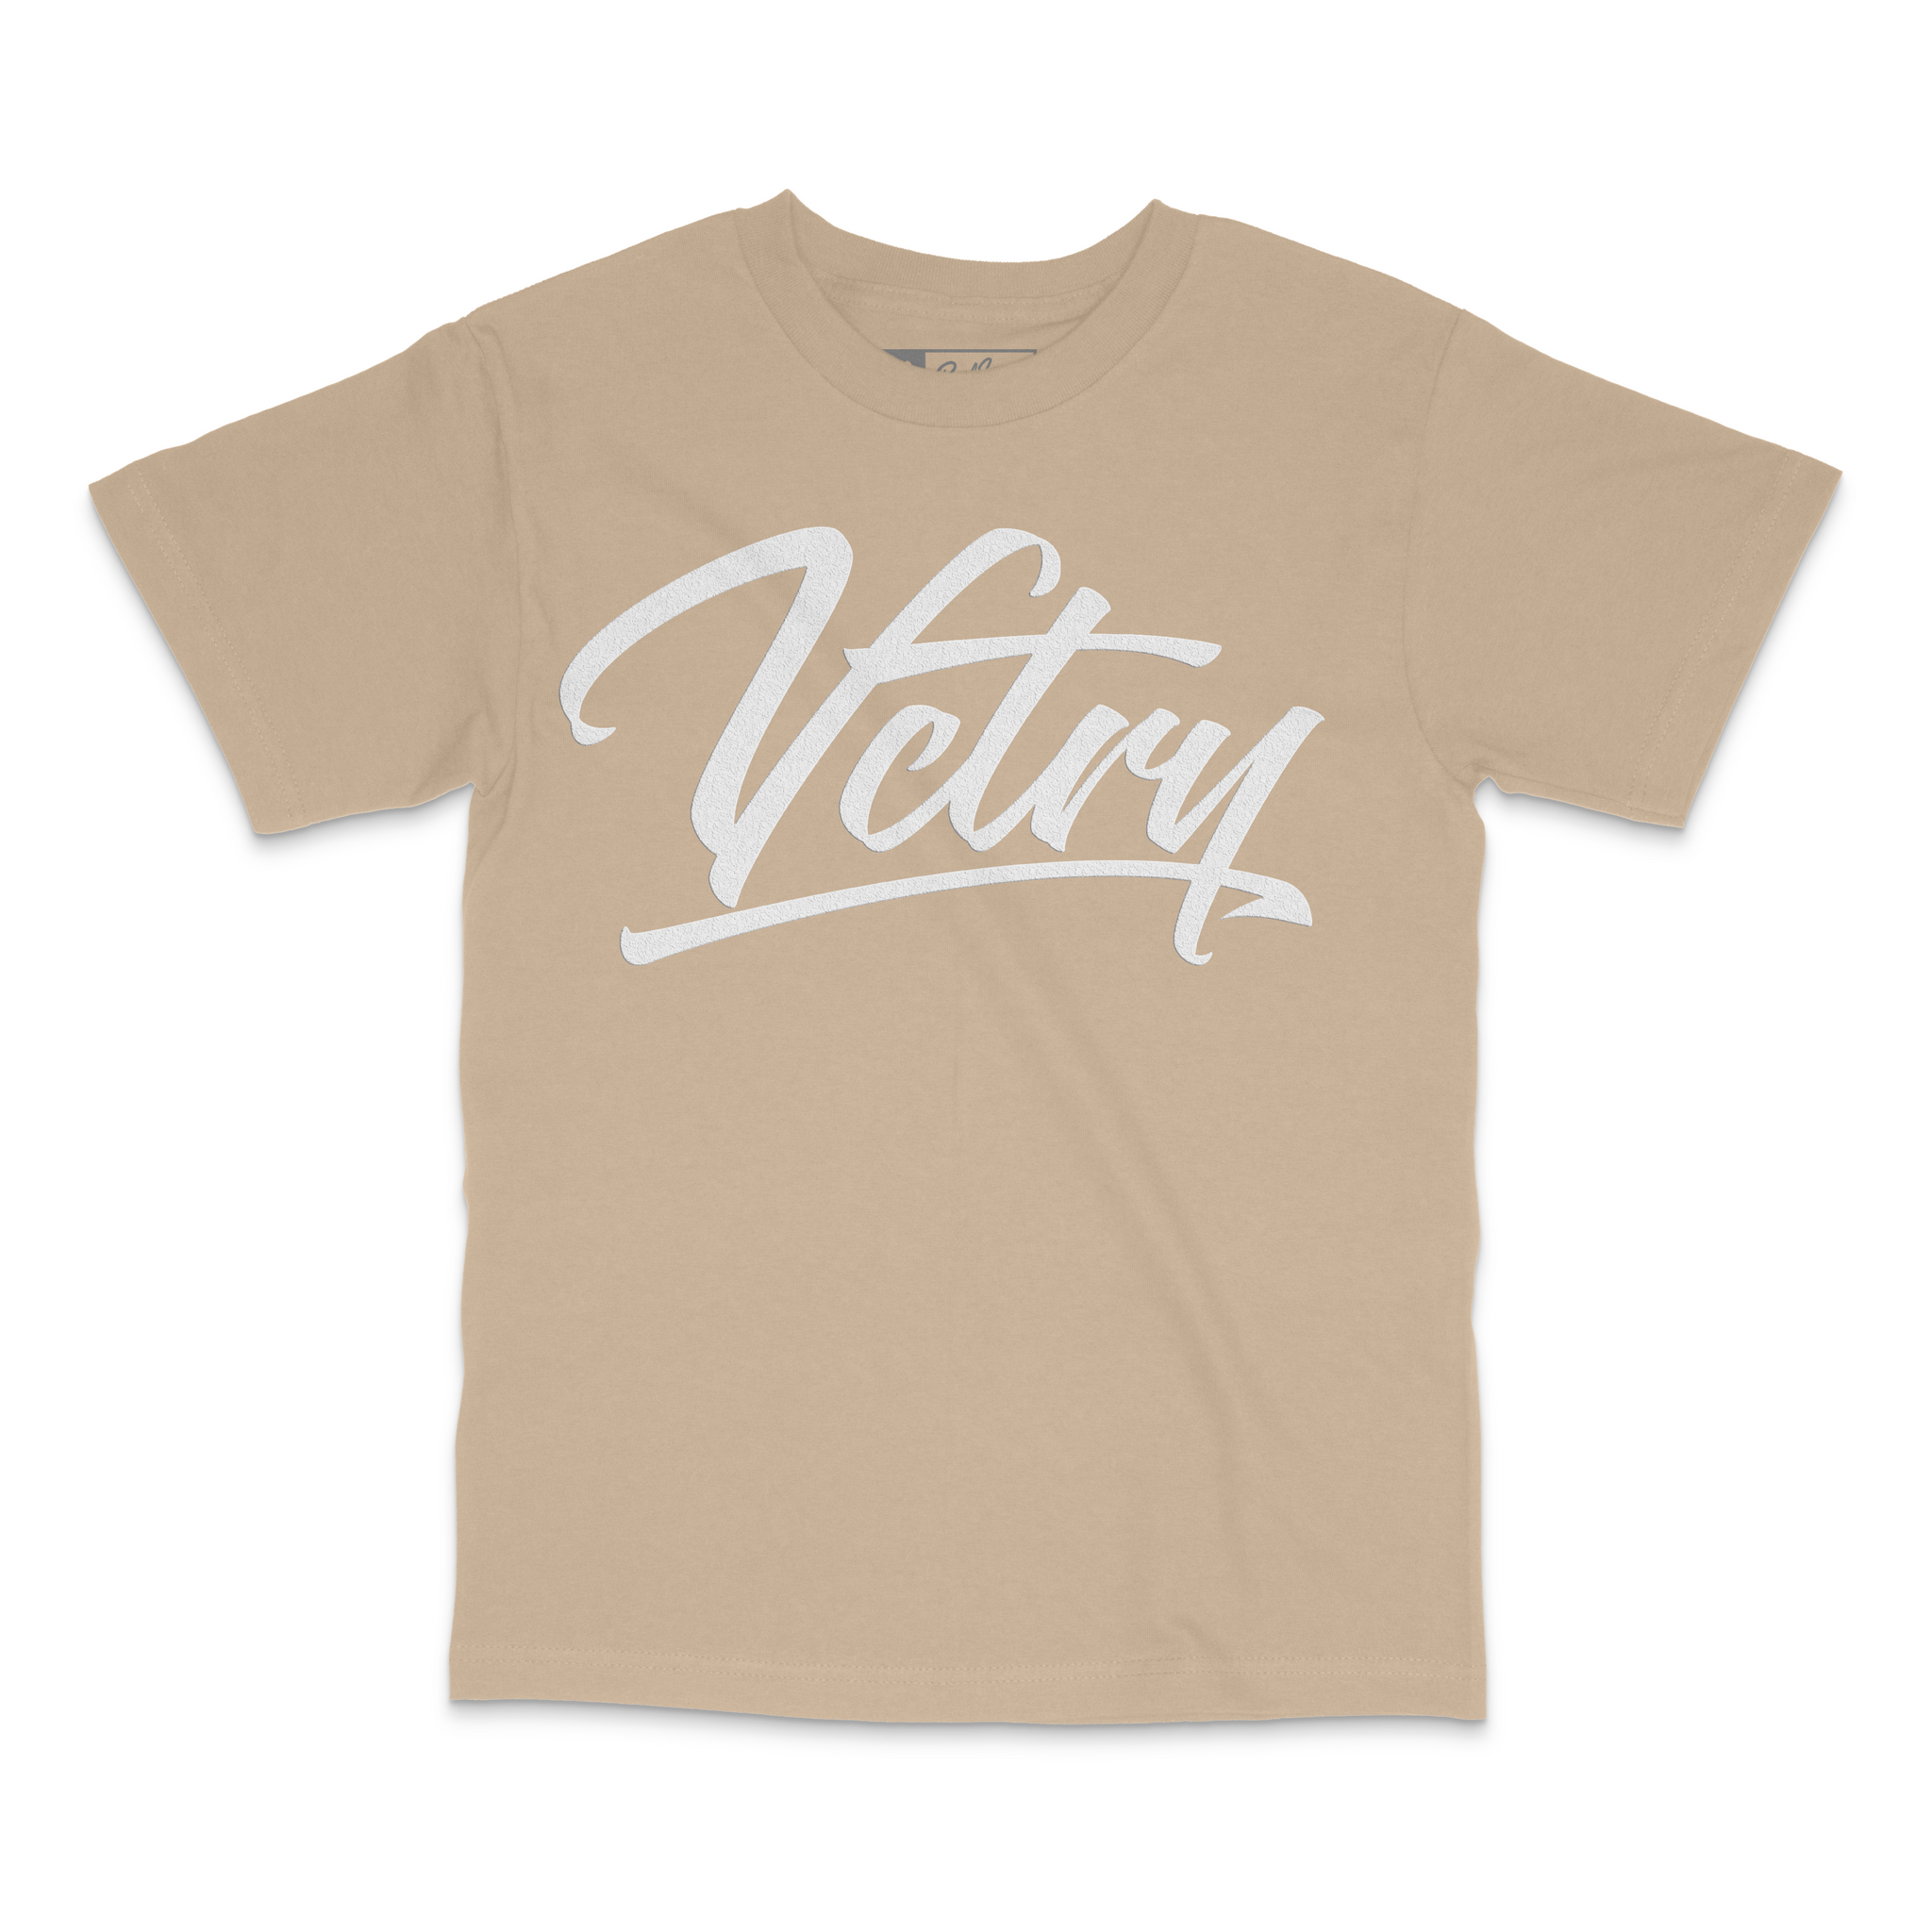 VCTRY Tee